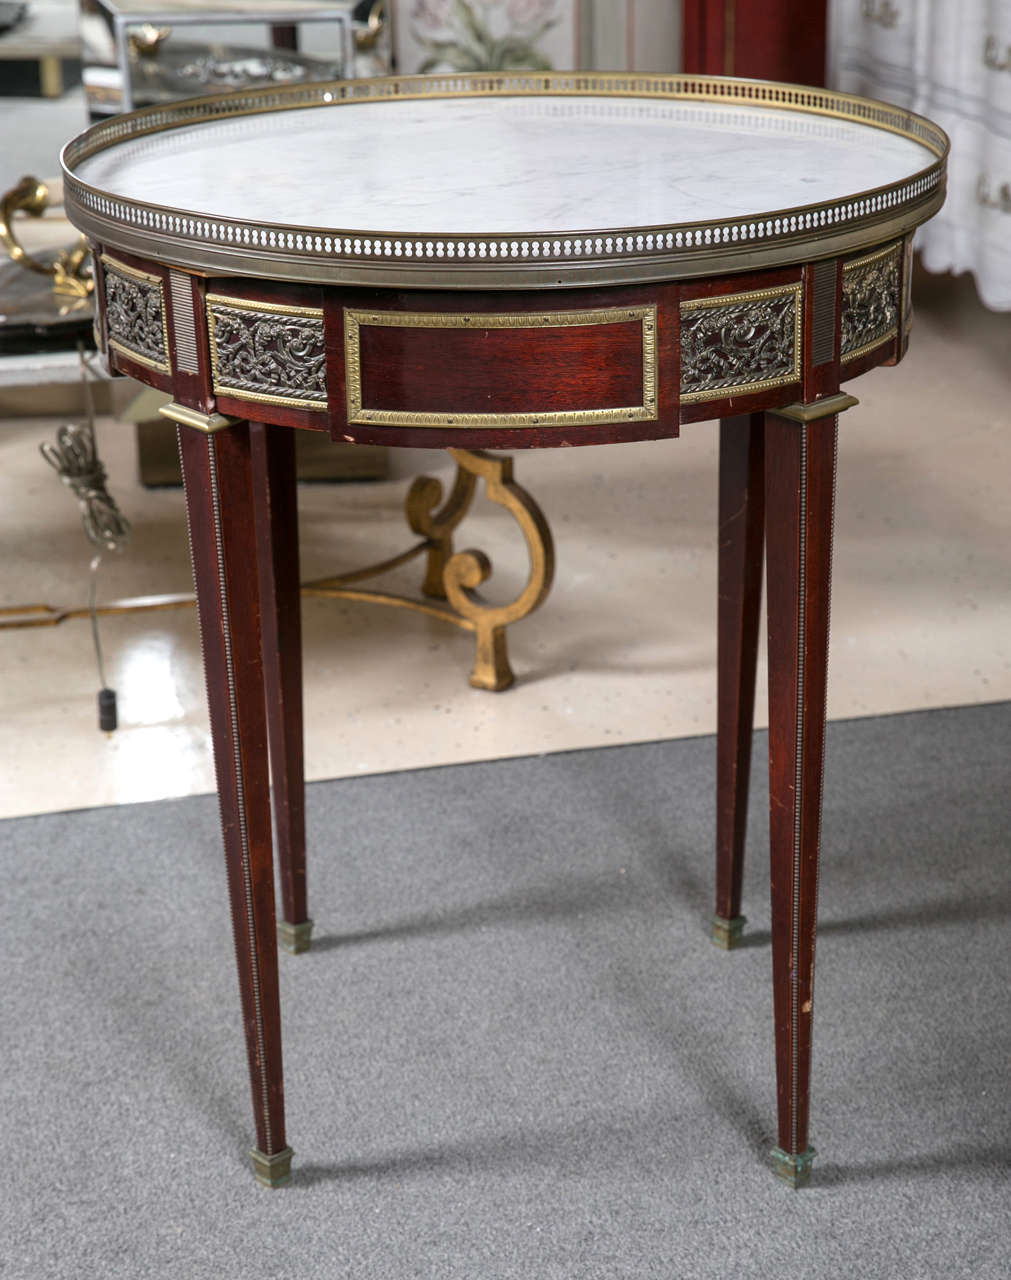 A marble-top Bouillotte table attributed to Maison Jansen. A wonderfully bronze mounted center table. The Carrara white marble top in a pierced bronze gallery supported by a single drawer apron with all-over heavy bronze mounts that terminate in